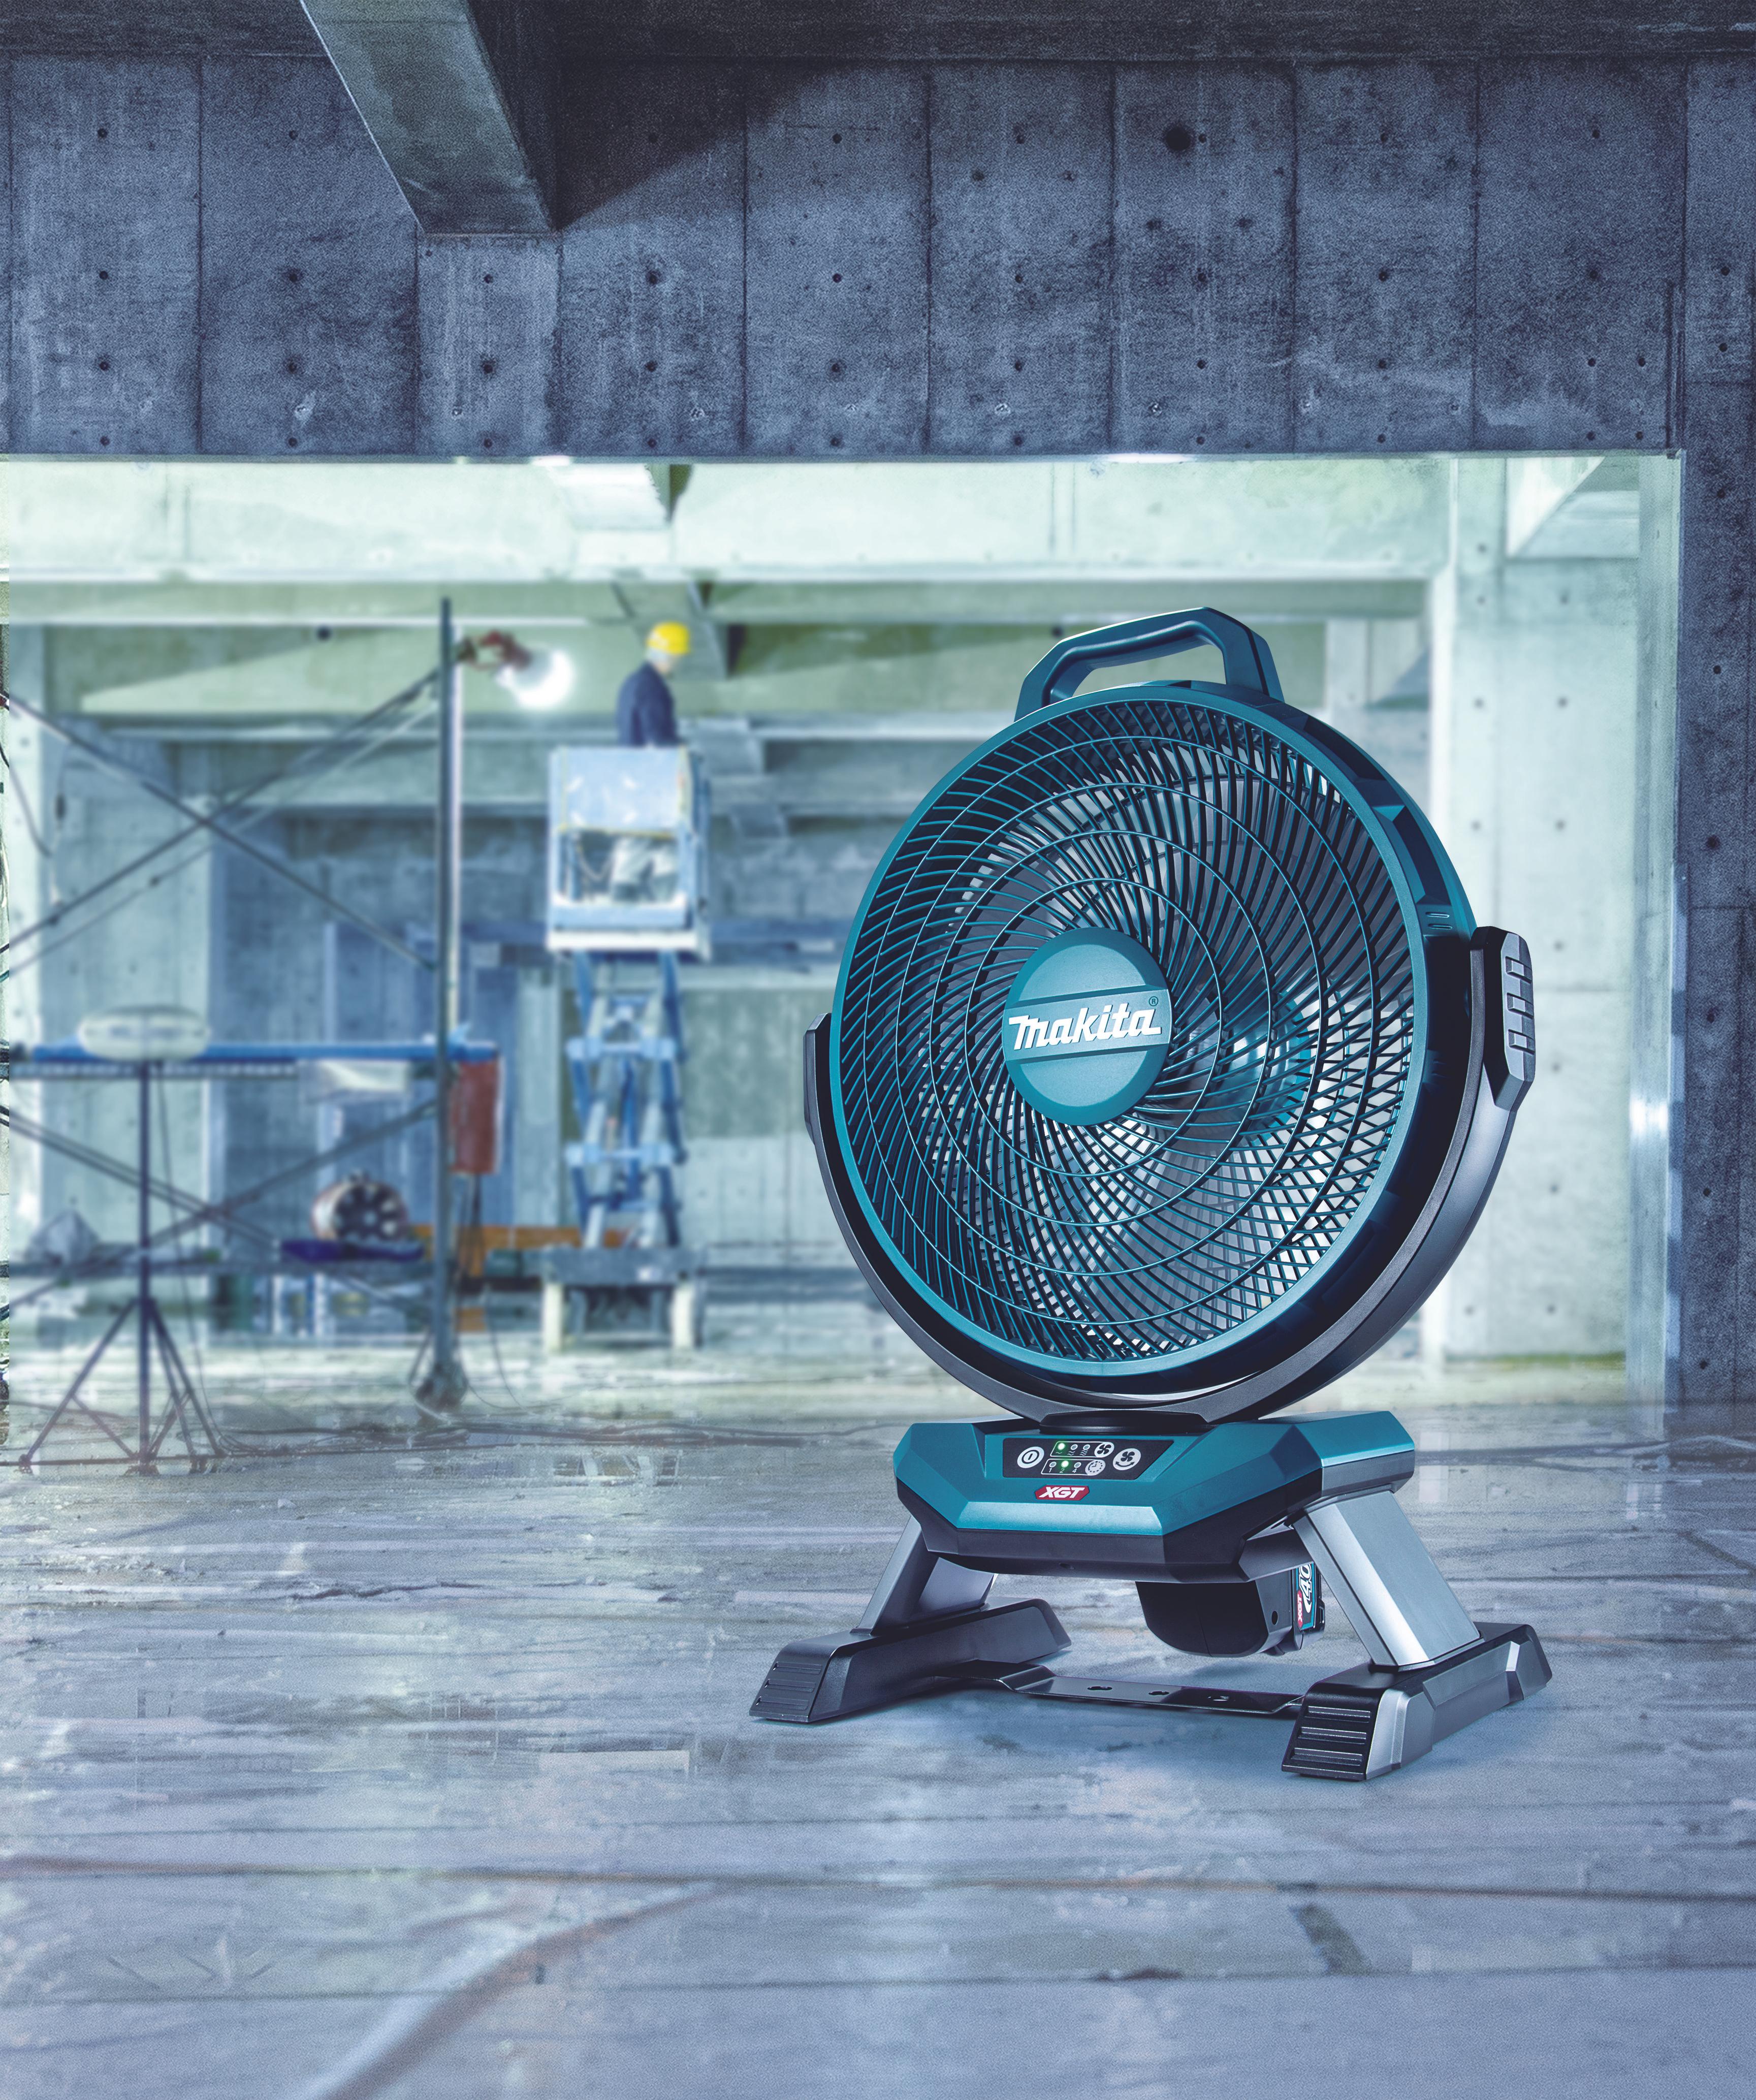 Mobile coolness - fans from Makita – image 3